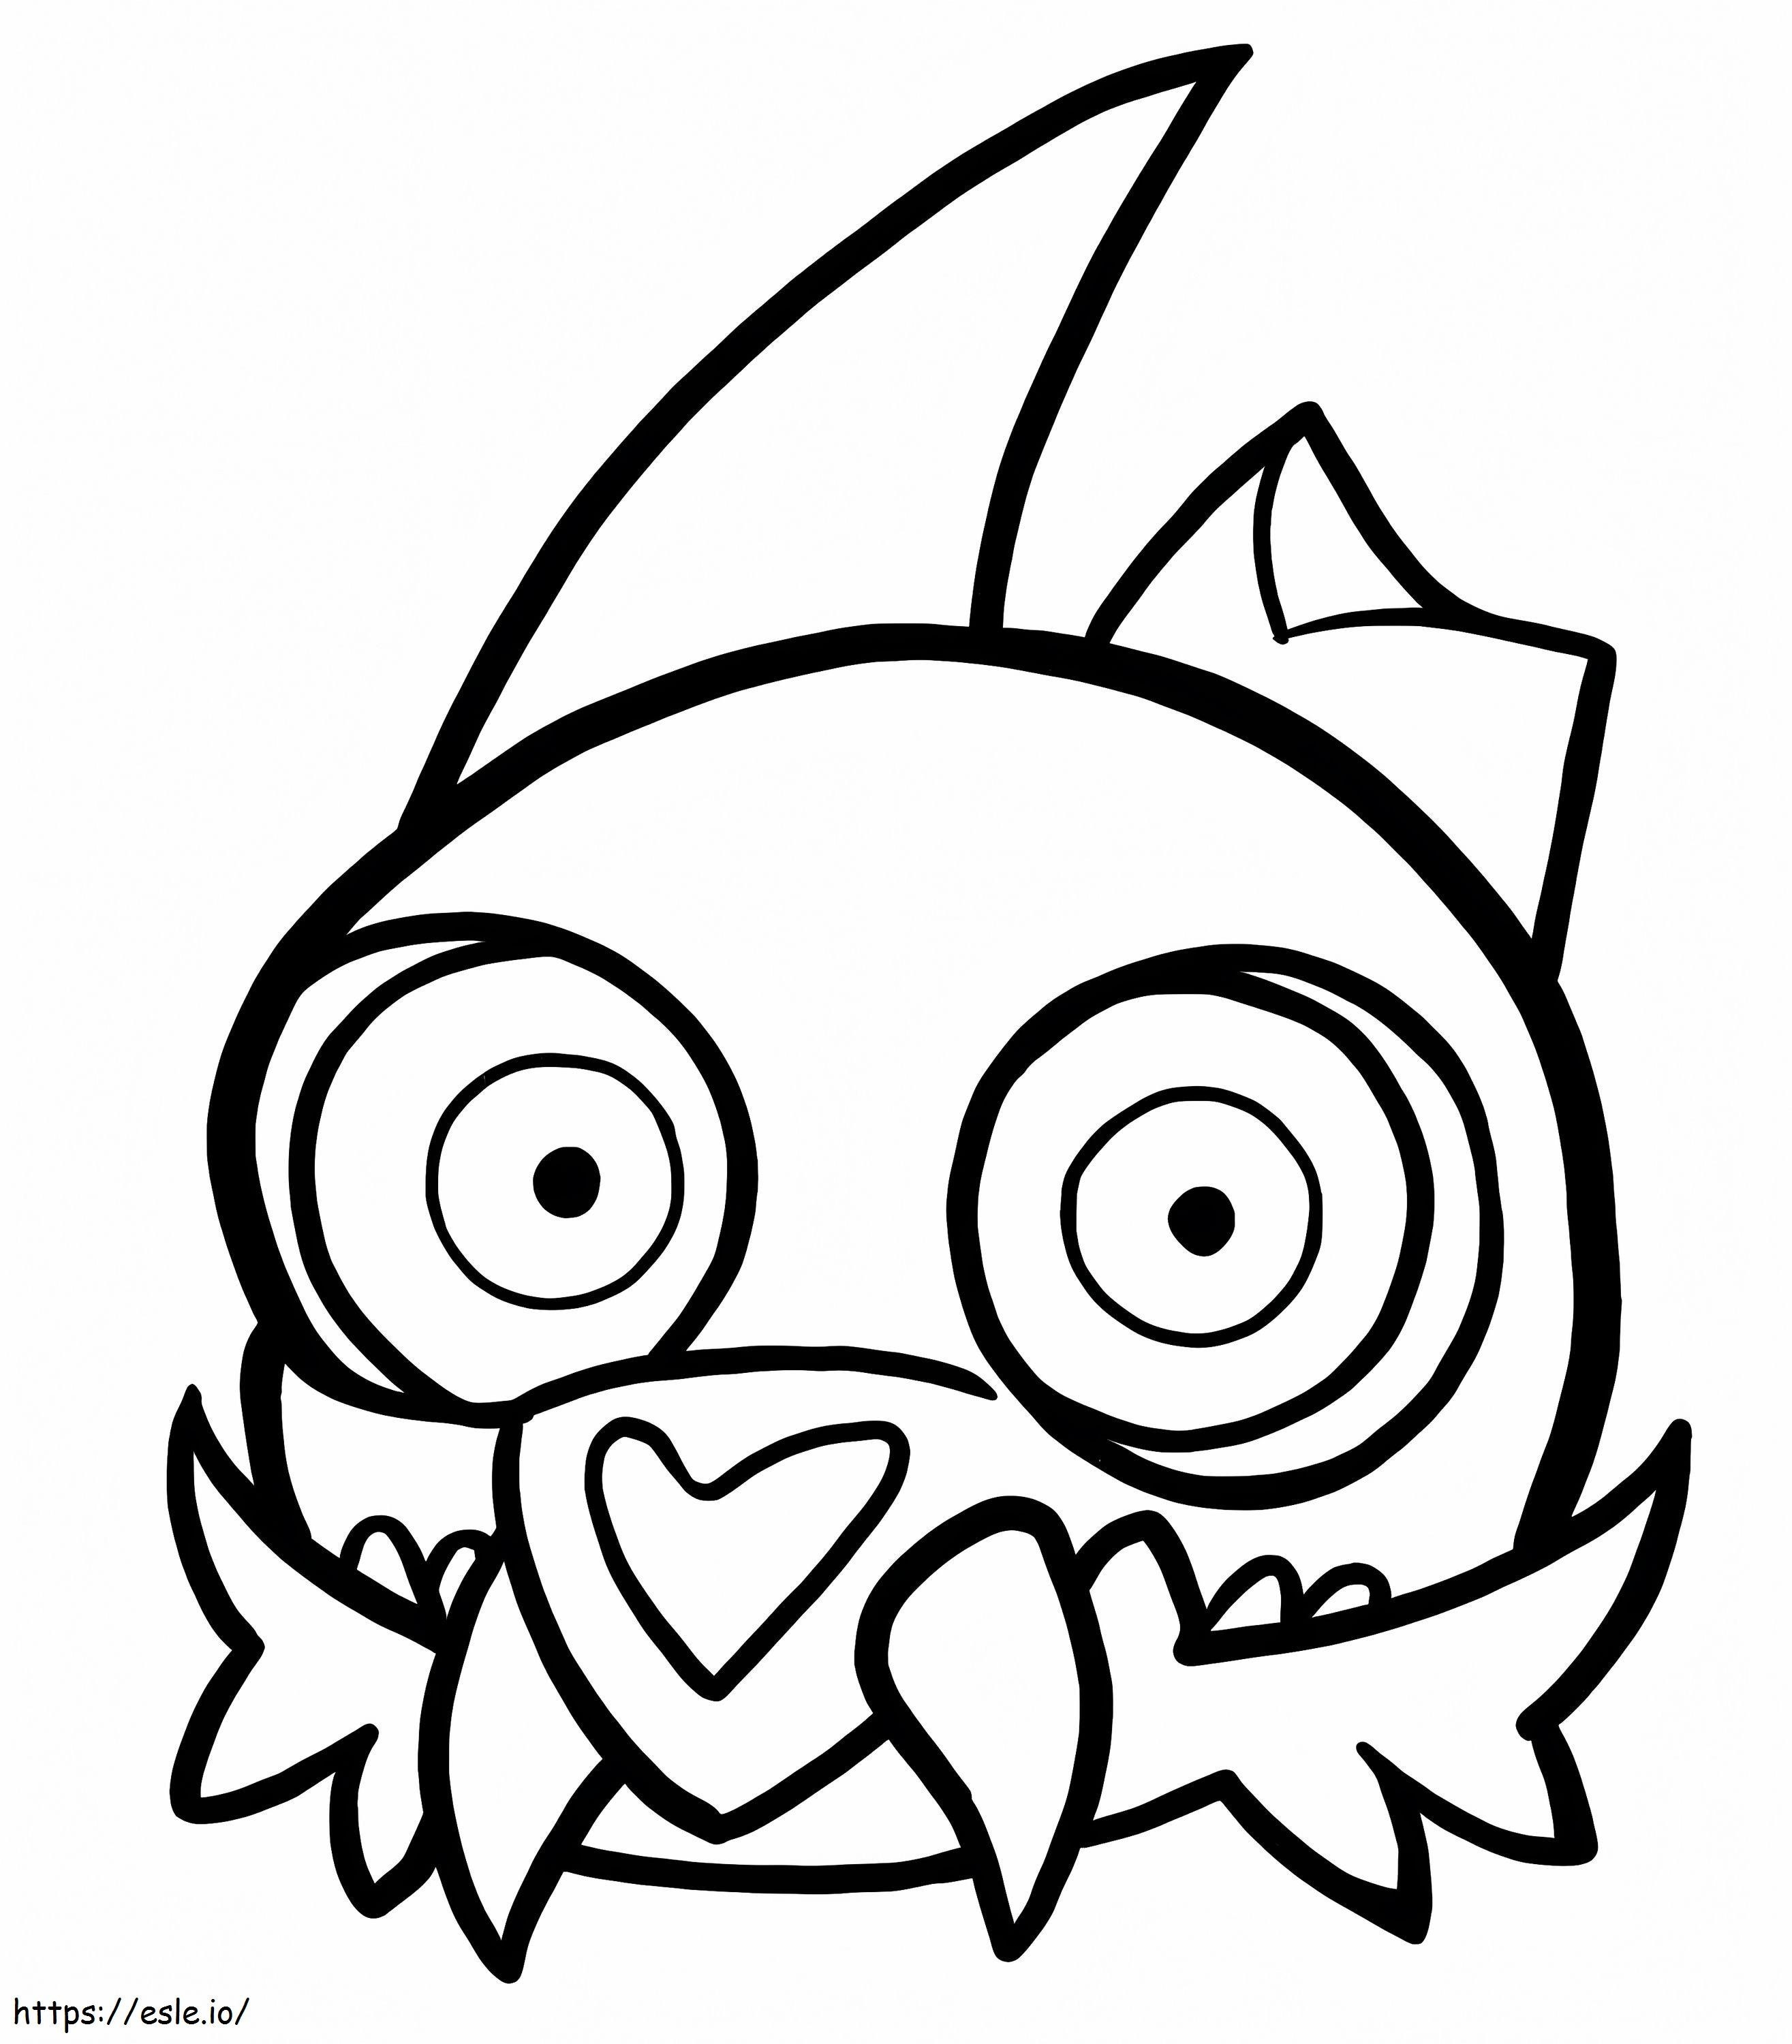 King The Owl House coloring page